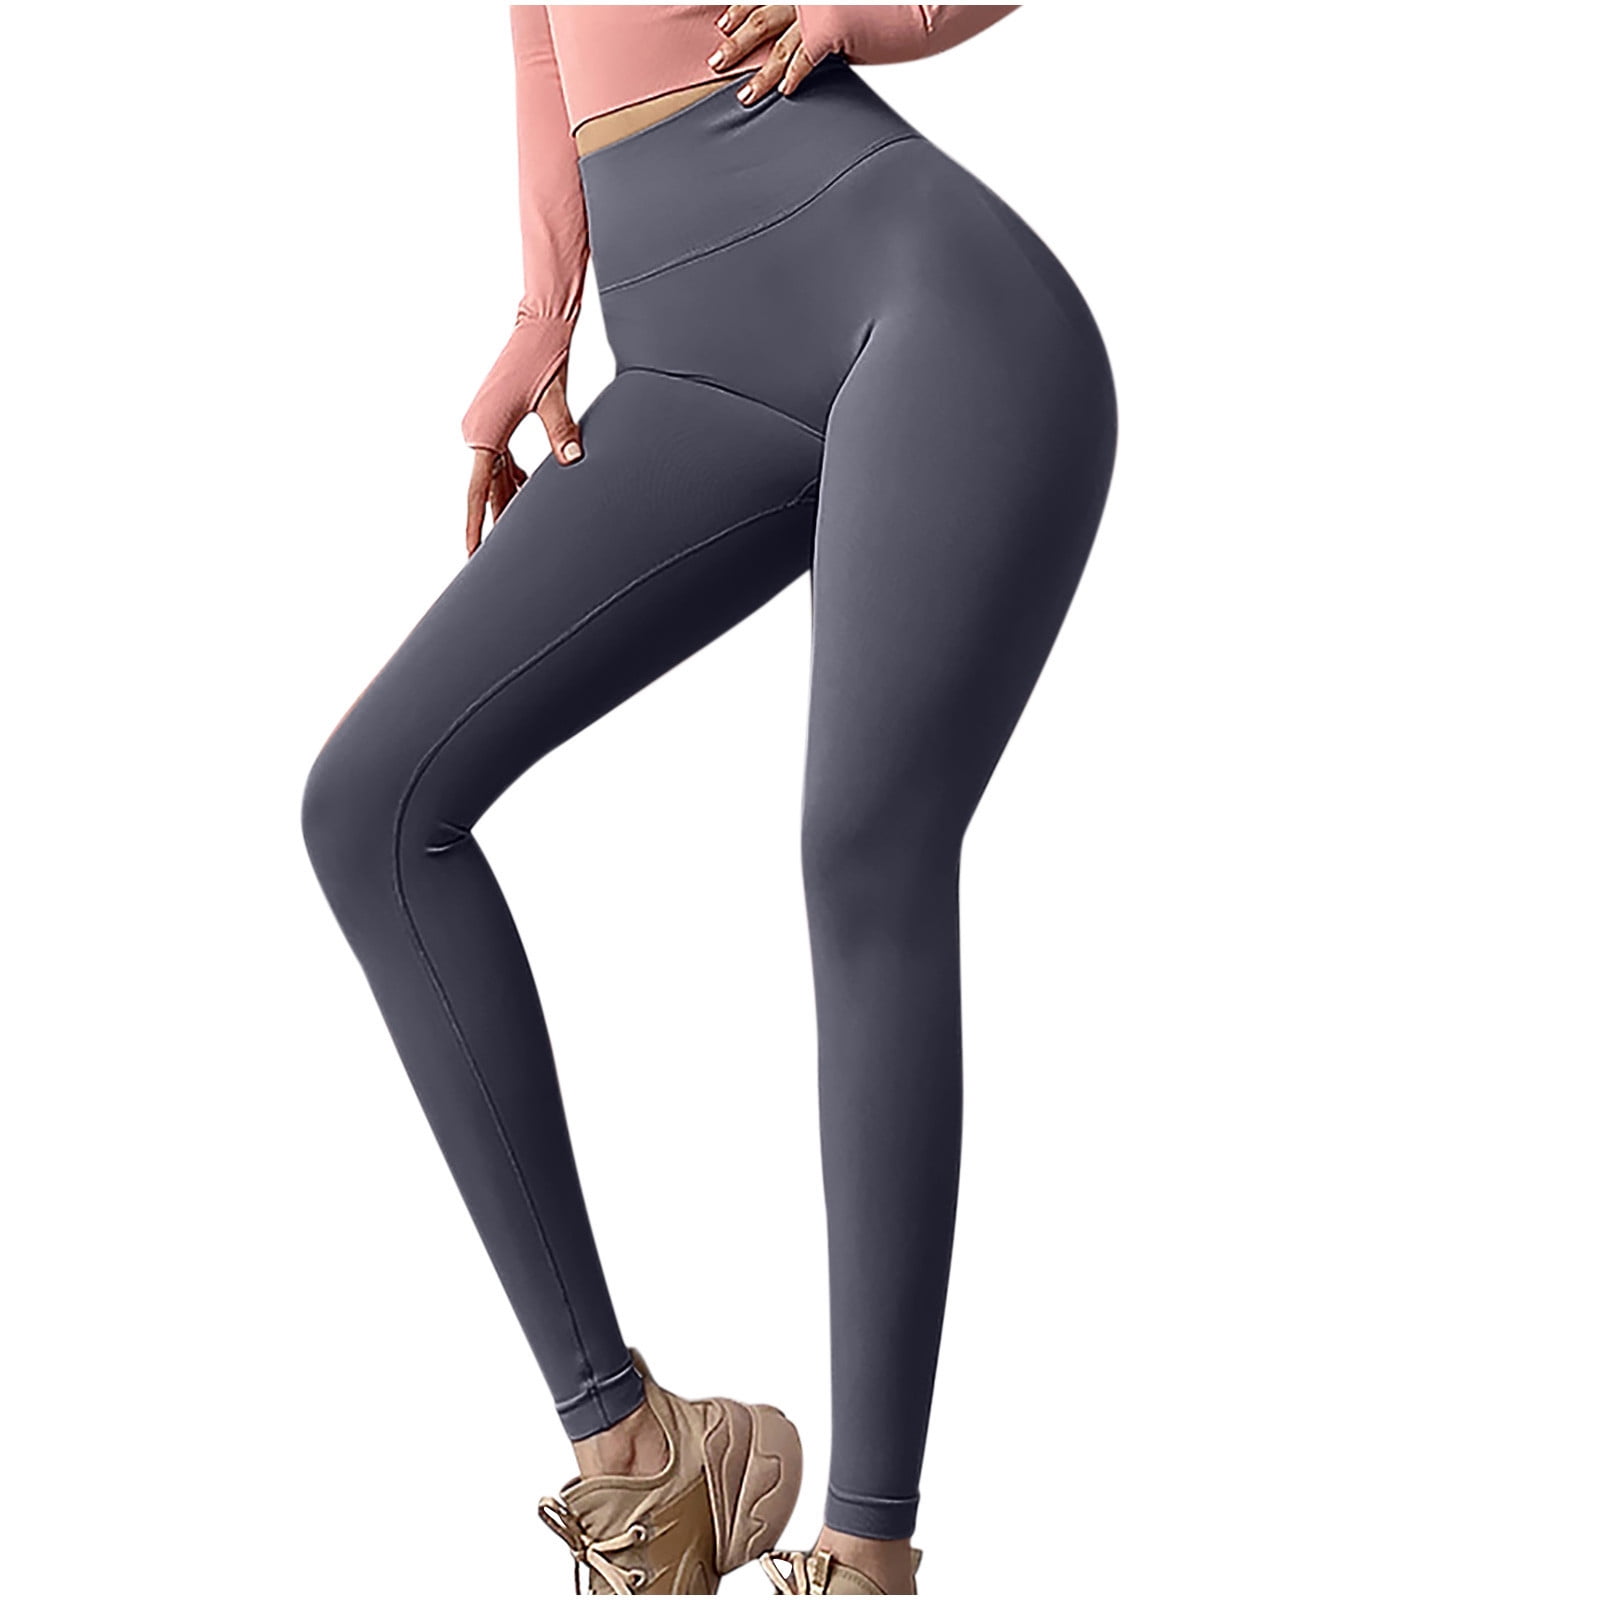 XFLWAM Workout Leggings for Women High Waist Tummy Control Buttery Soft Gym  Sport Yoga Pants Squat Proof Booty Tights Black M